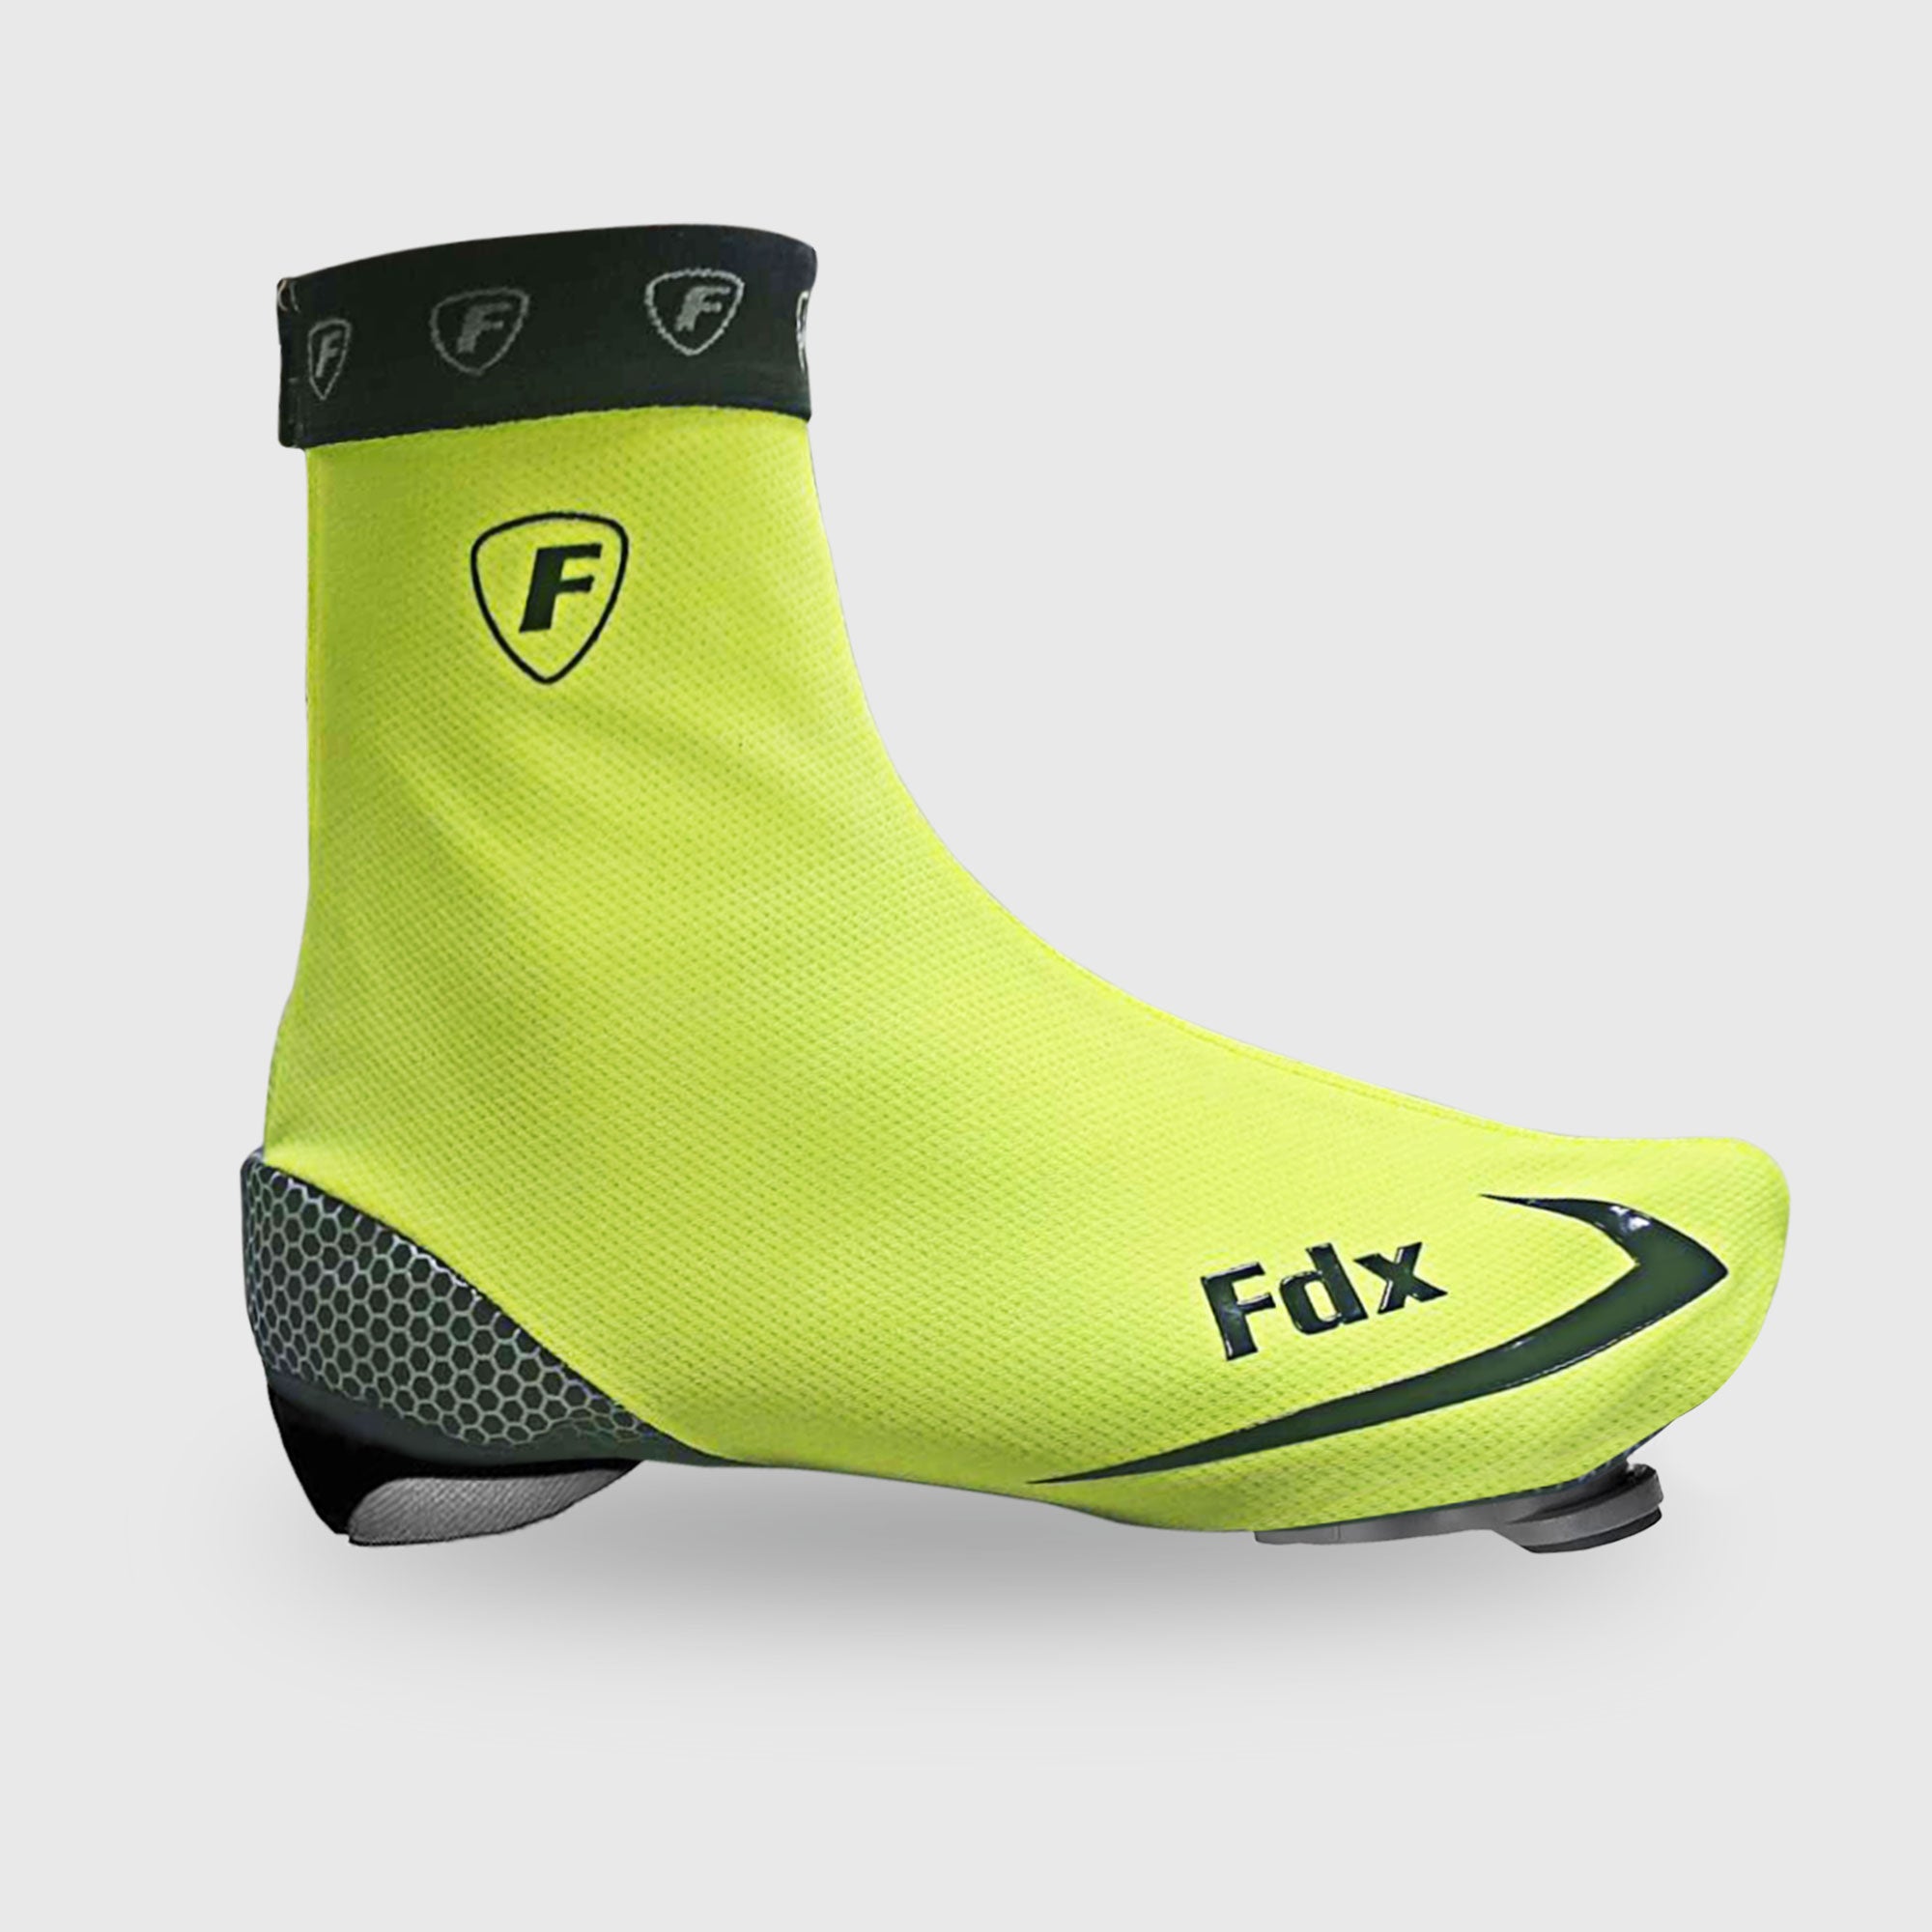 Fdx SC2 Fluorescent Yellow Cycling Shoe Covers